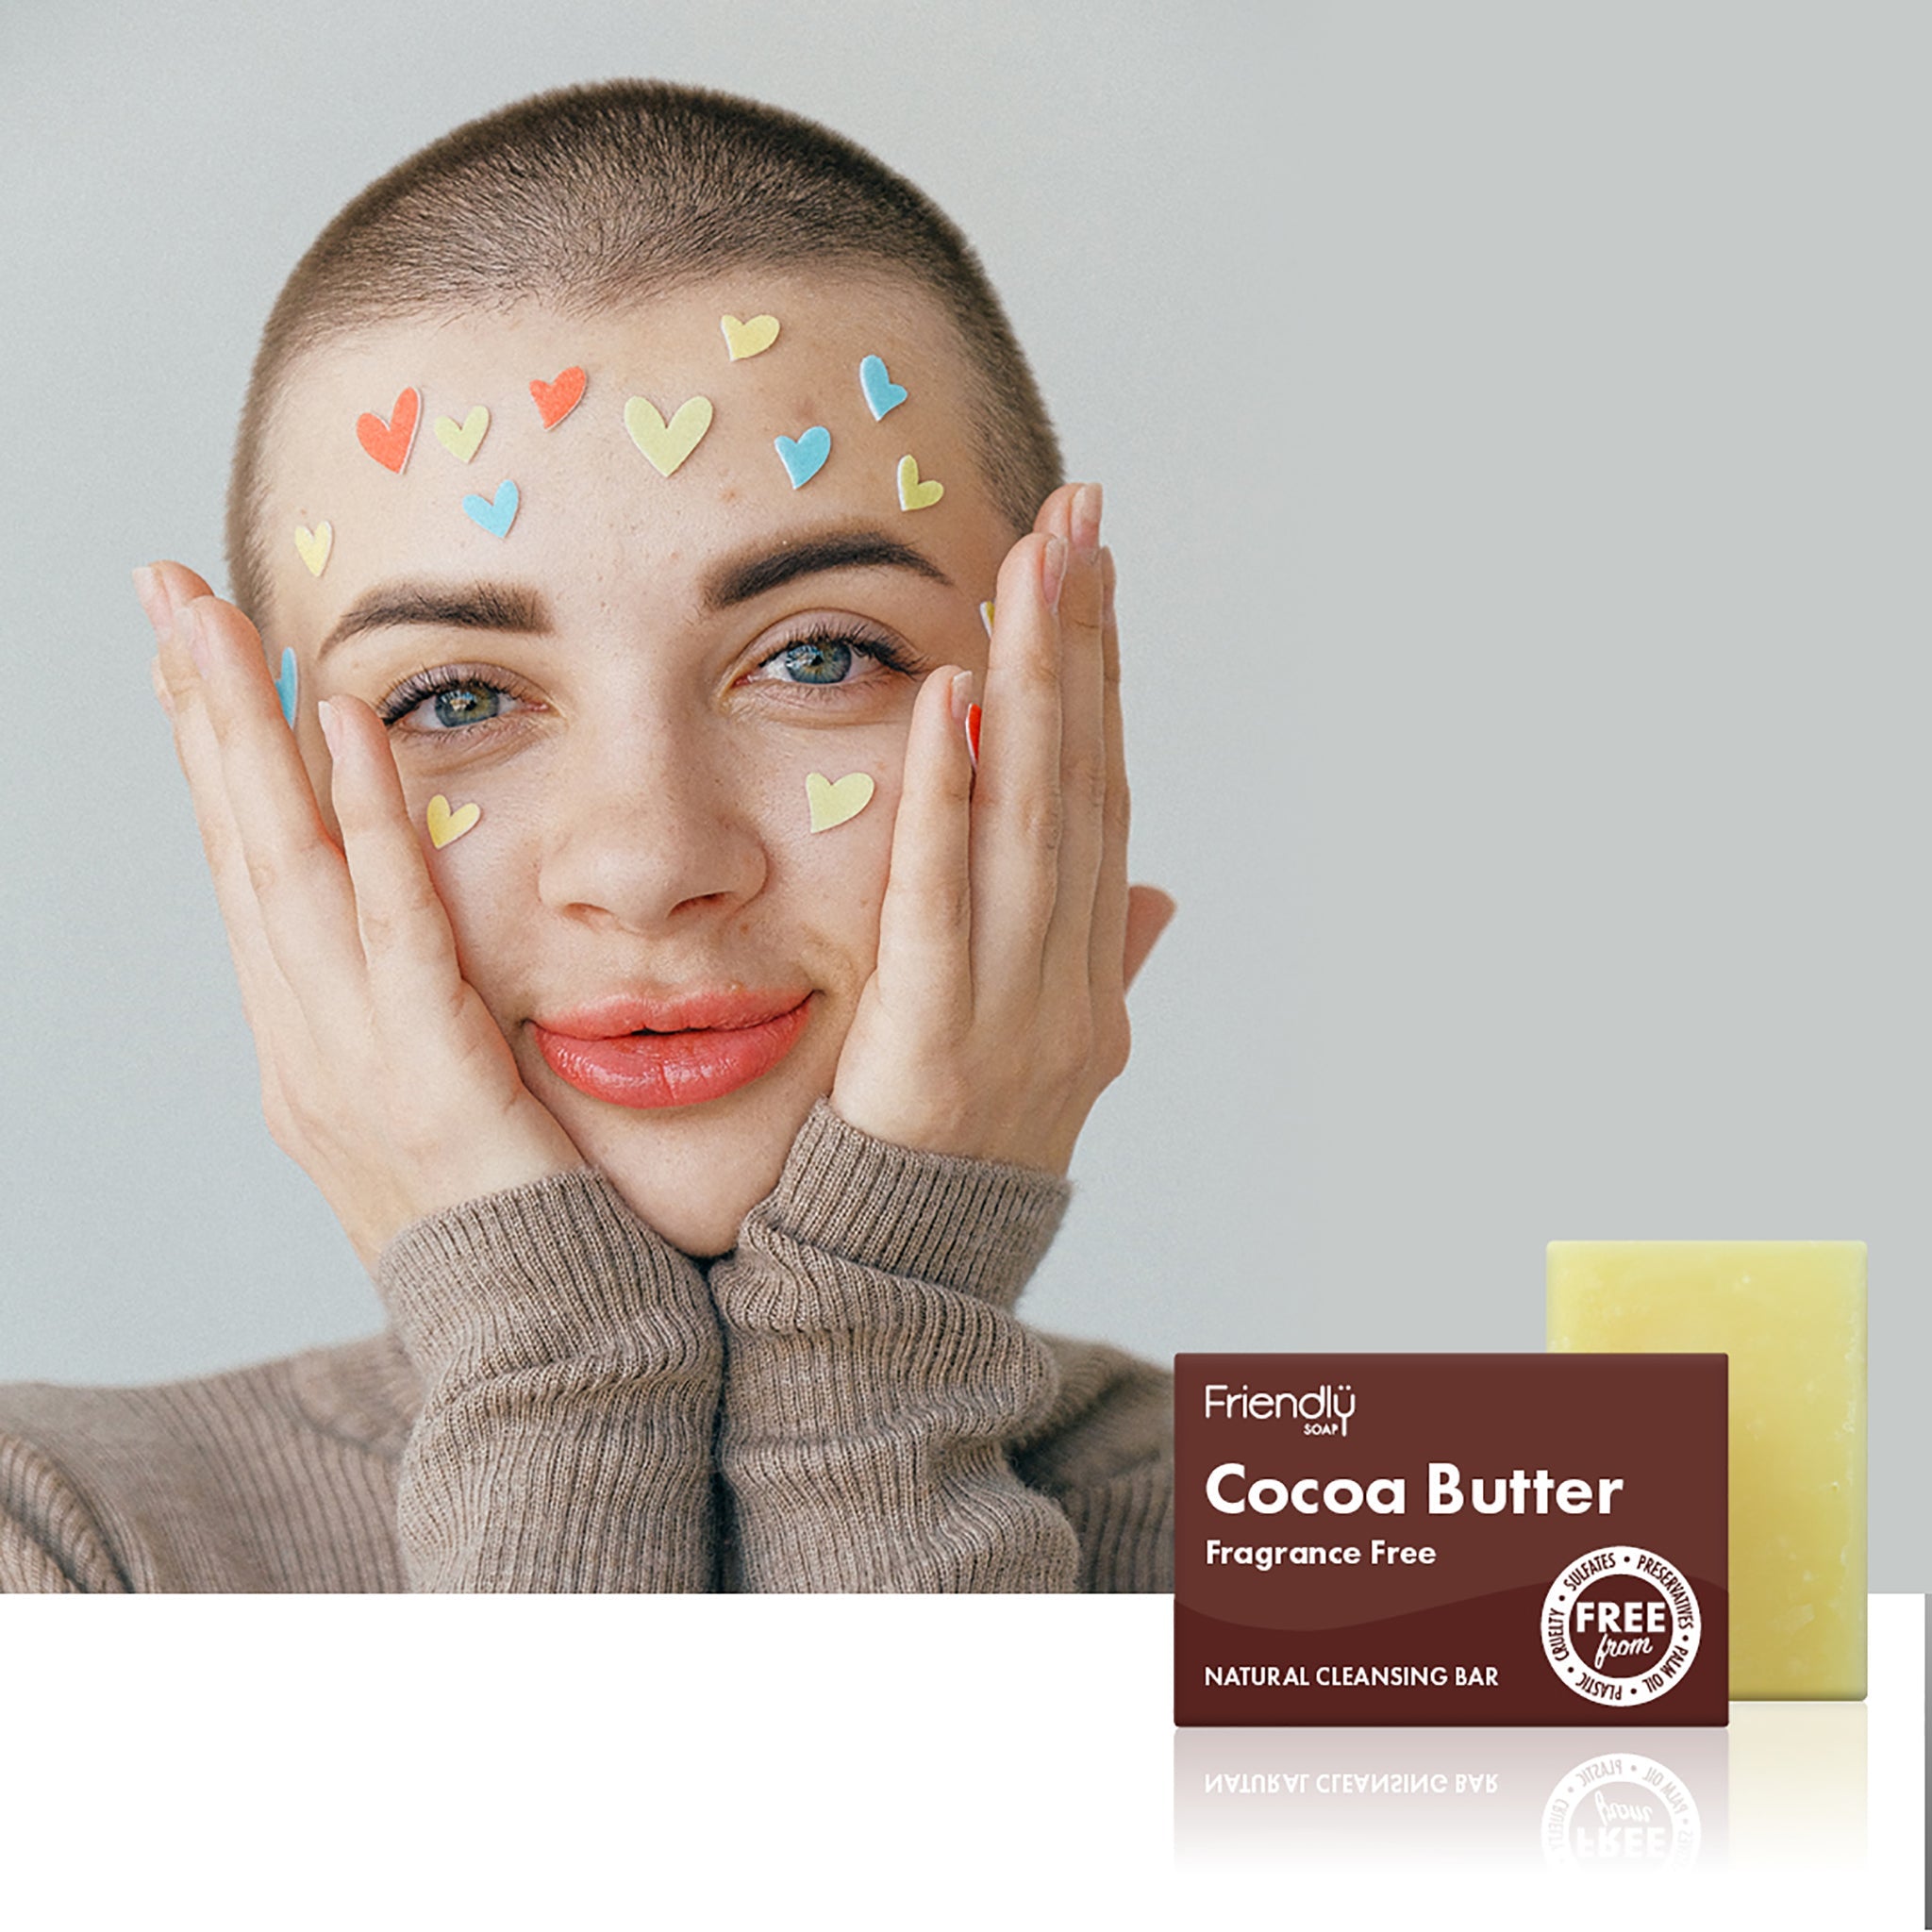 Cleansing Bar | Cocoa Butter Fragrance Free